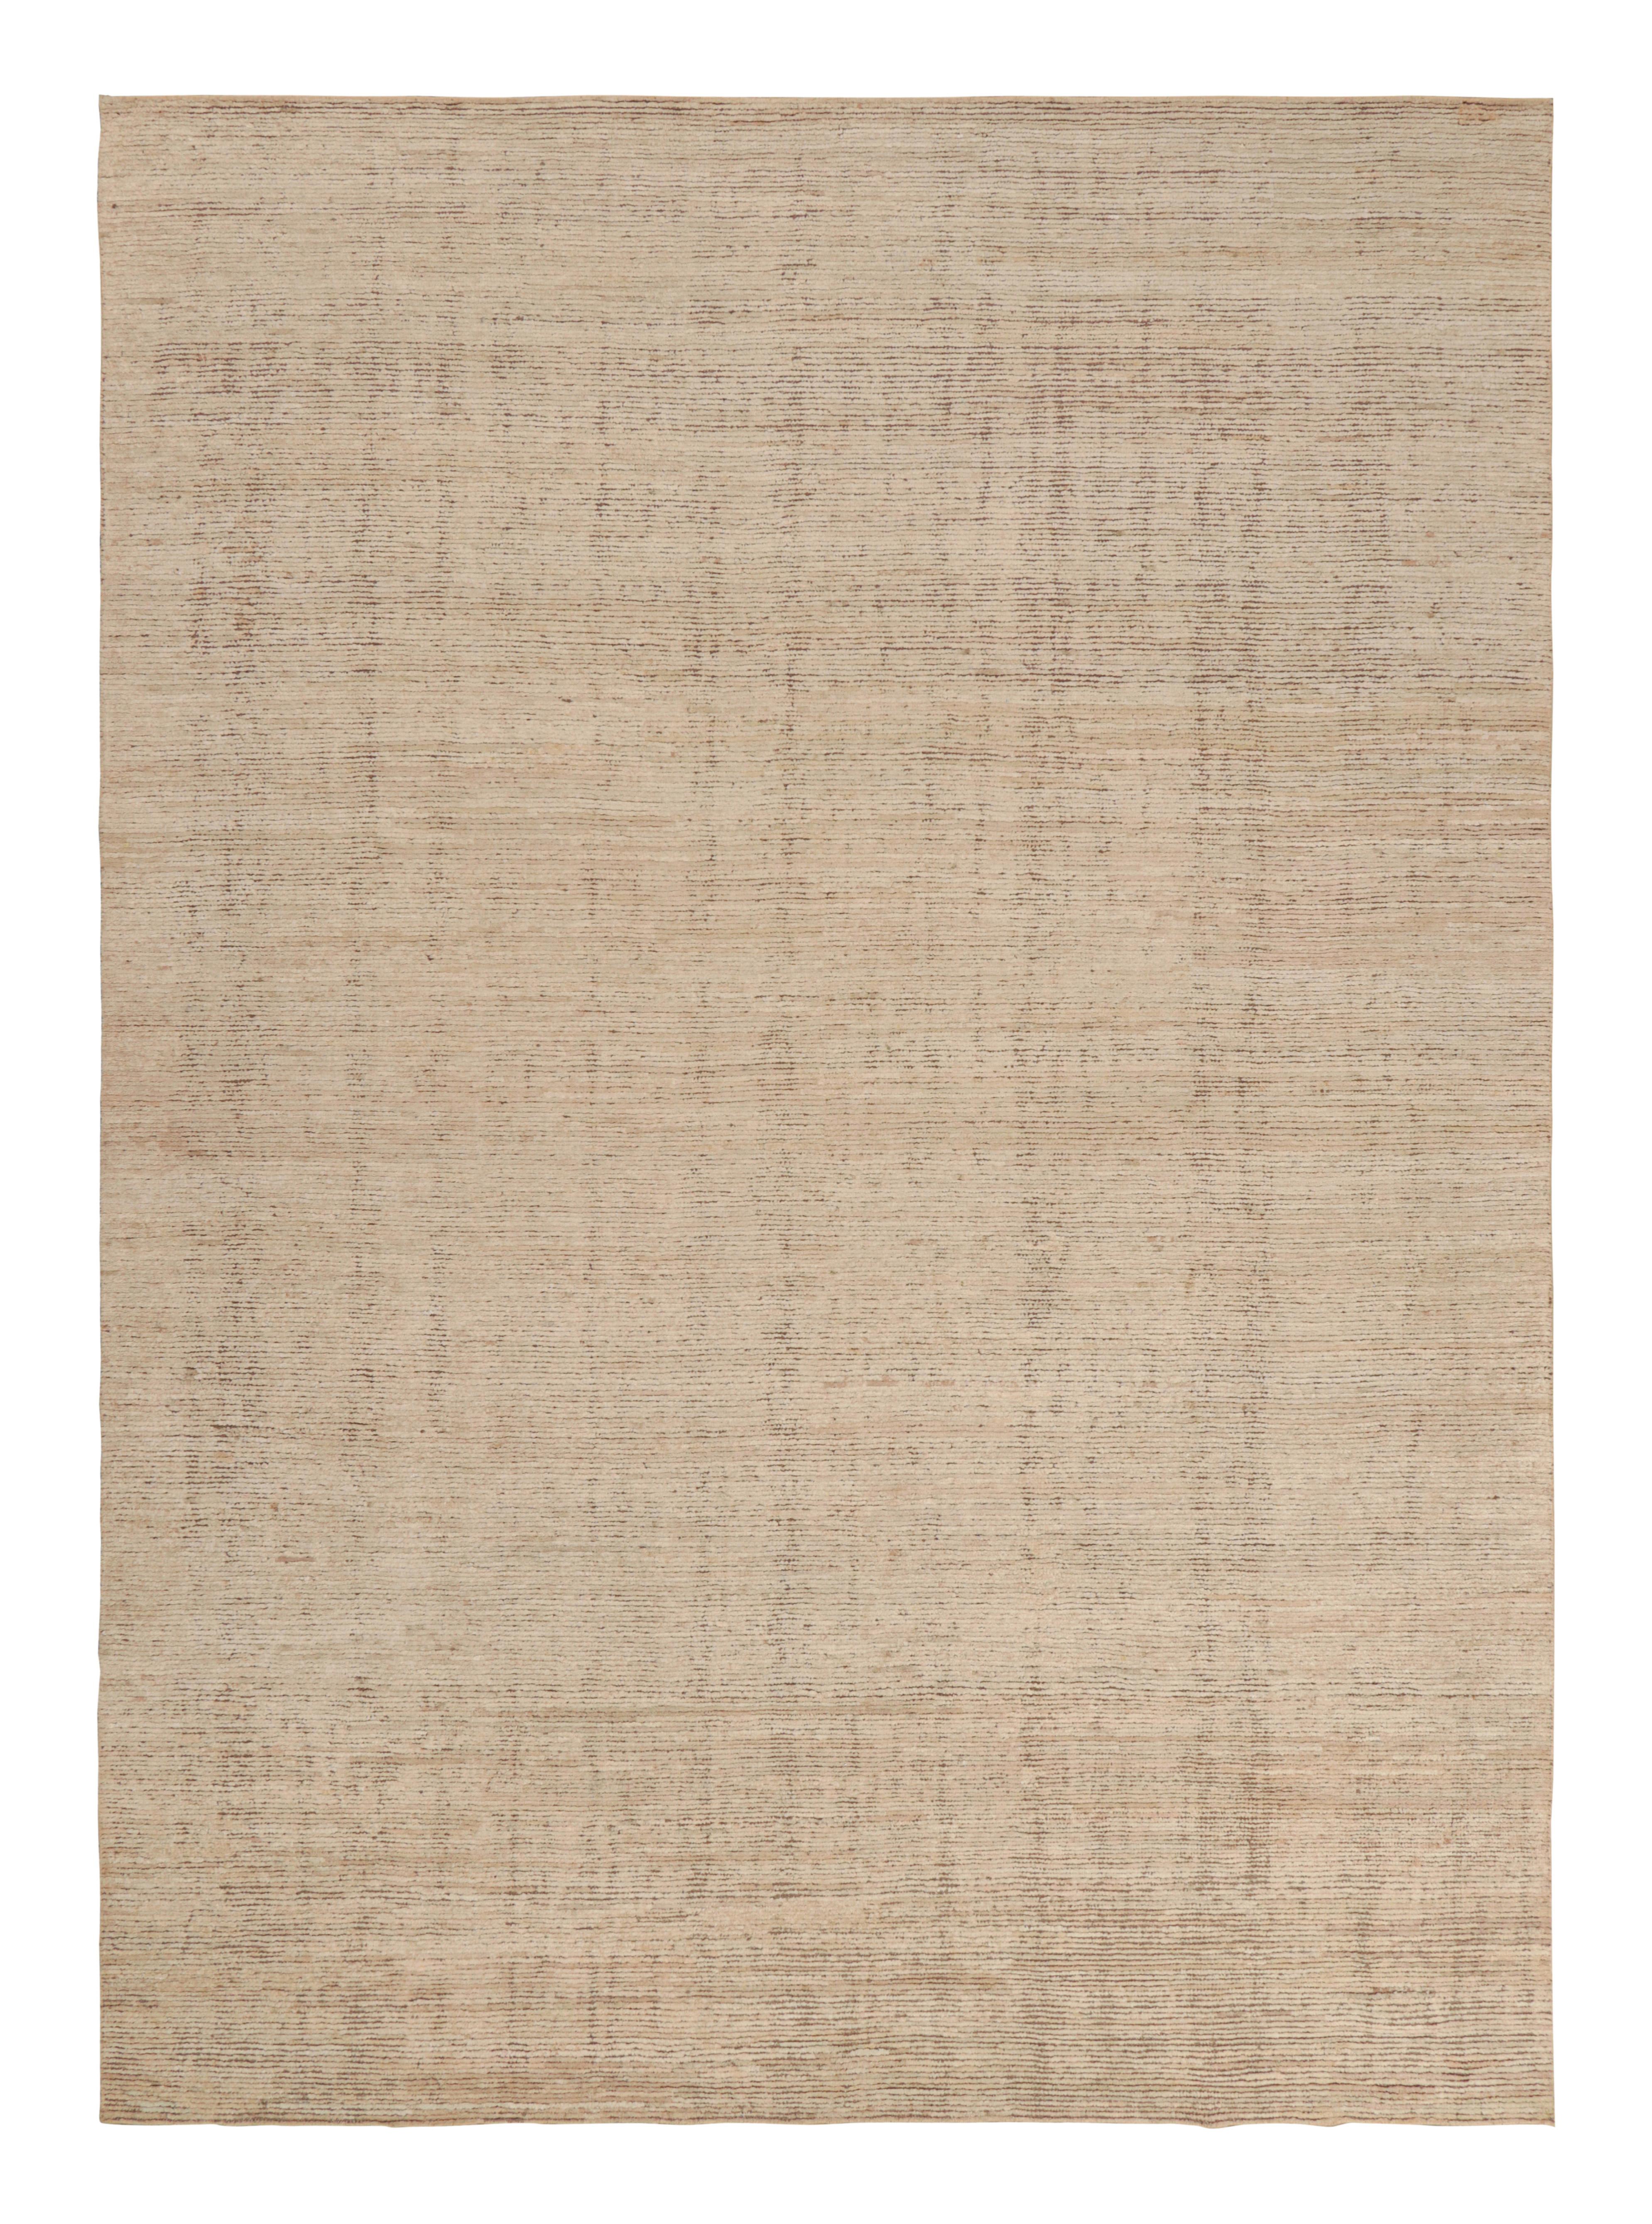 Hand-woven in silk, this 10x14 textural rug represents an exciting new contemporary from Rug & Kilim’s Texture of Color collection.

On the Design: 

Our textural collection enjoys an inventive take on plain rugs, with this particular design